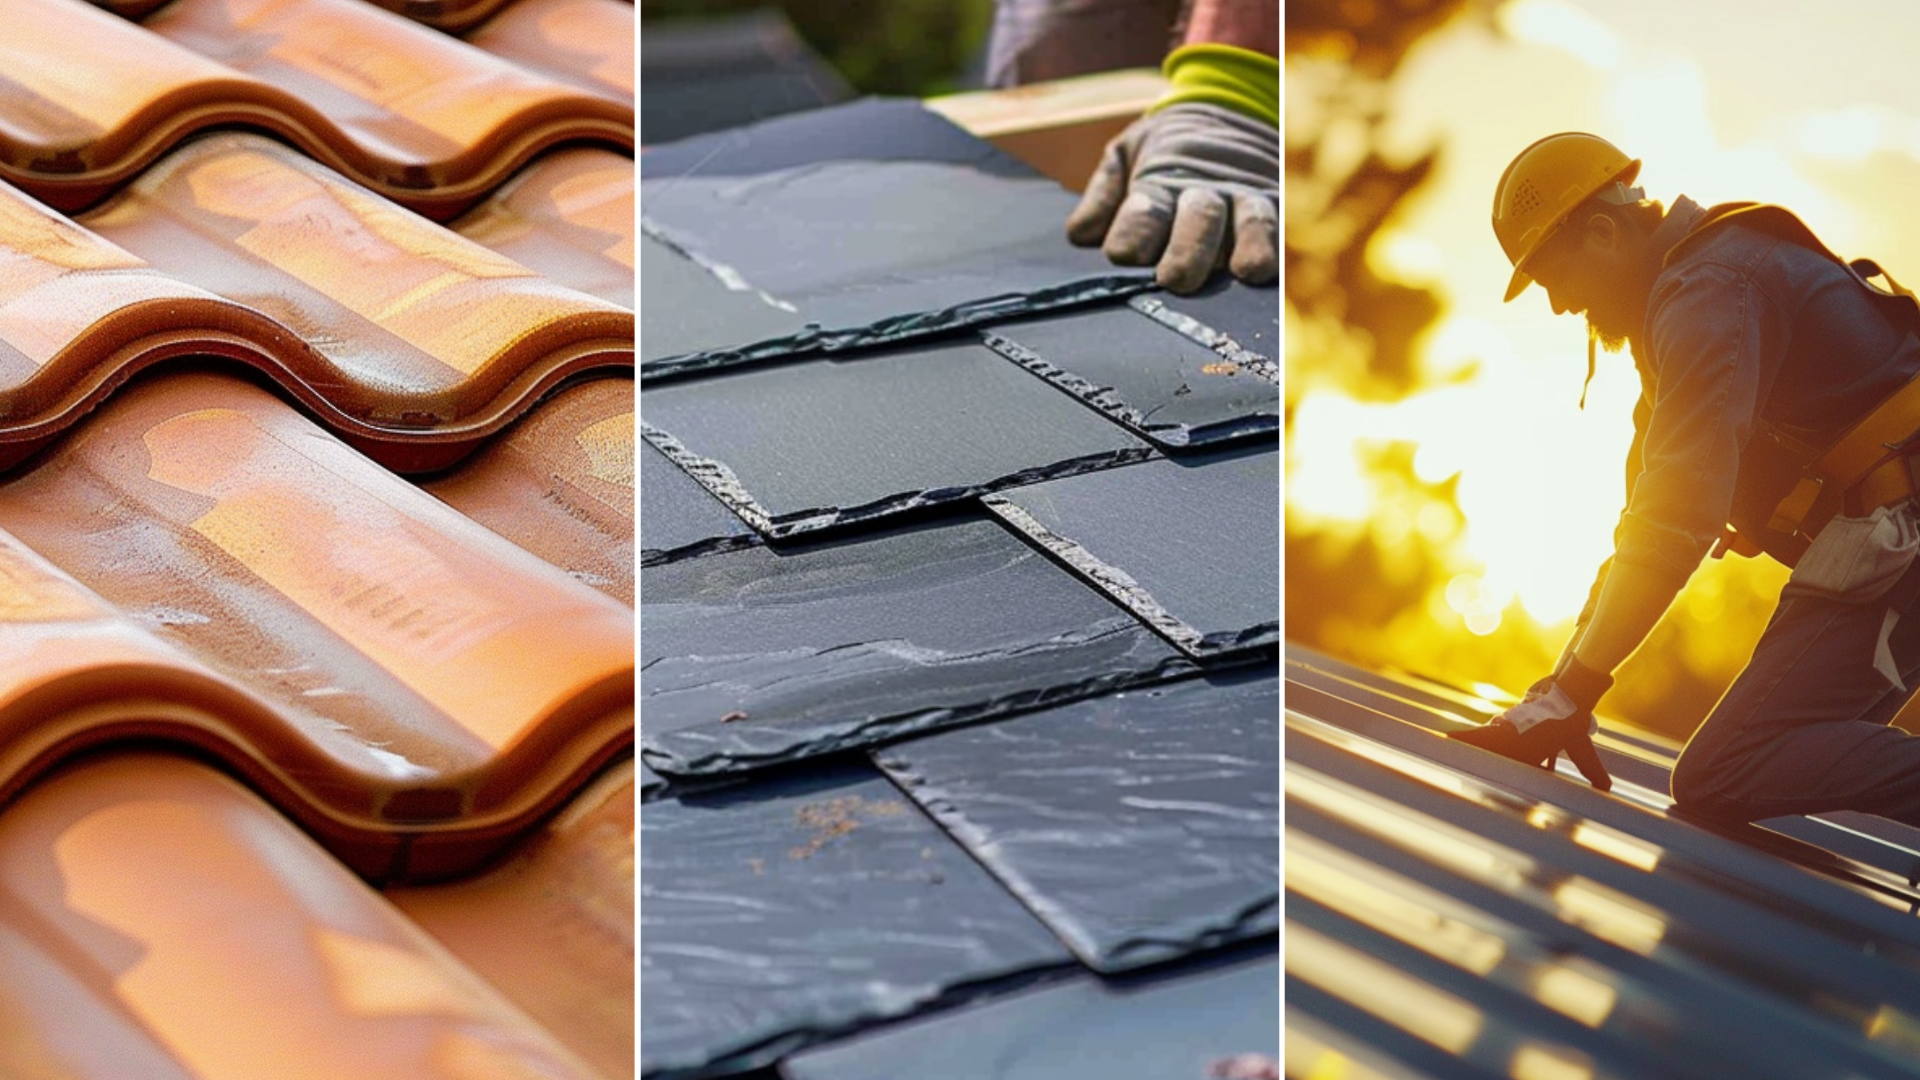 create an image of a newly installed clay tile roof, emaphasize that the clay tile roof is new,</p>
<p>create an image of a roofing constructor that is fixing a slate roof of a house.</p>
<p>A photograph of two sheet metal workers, wearing safety gear, actively installing a metal roof